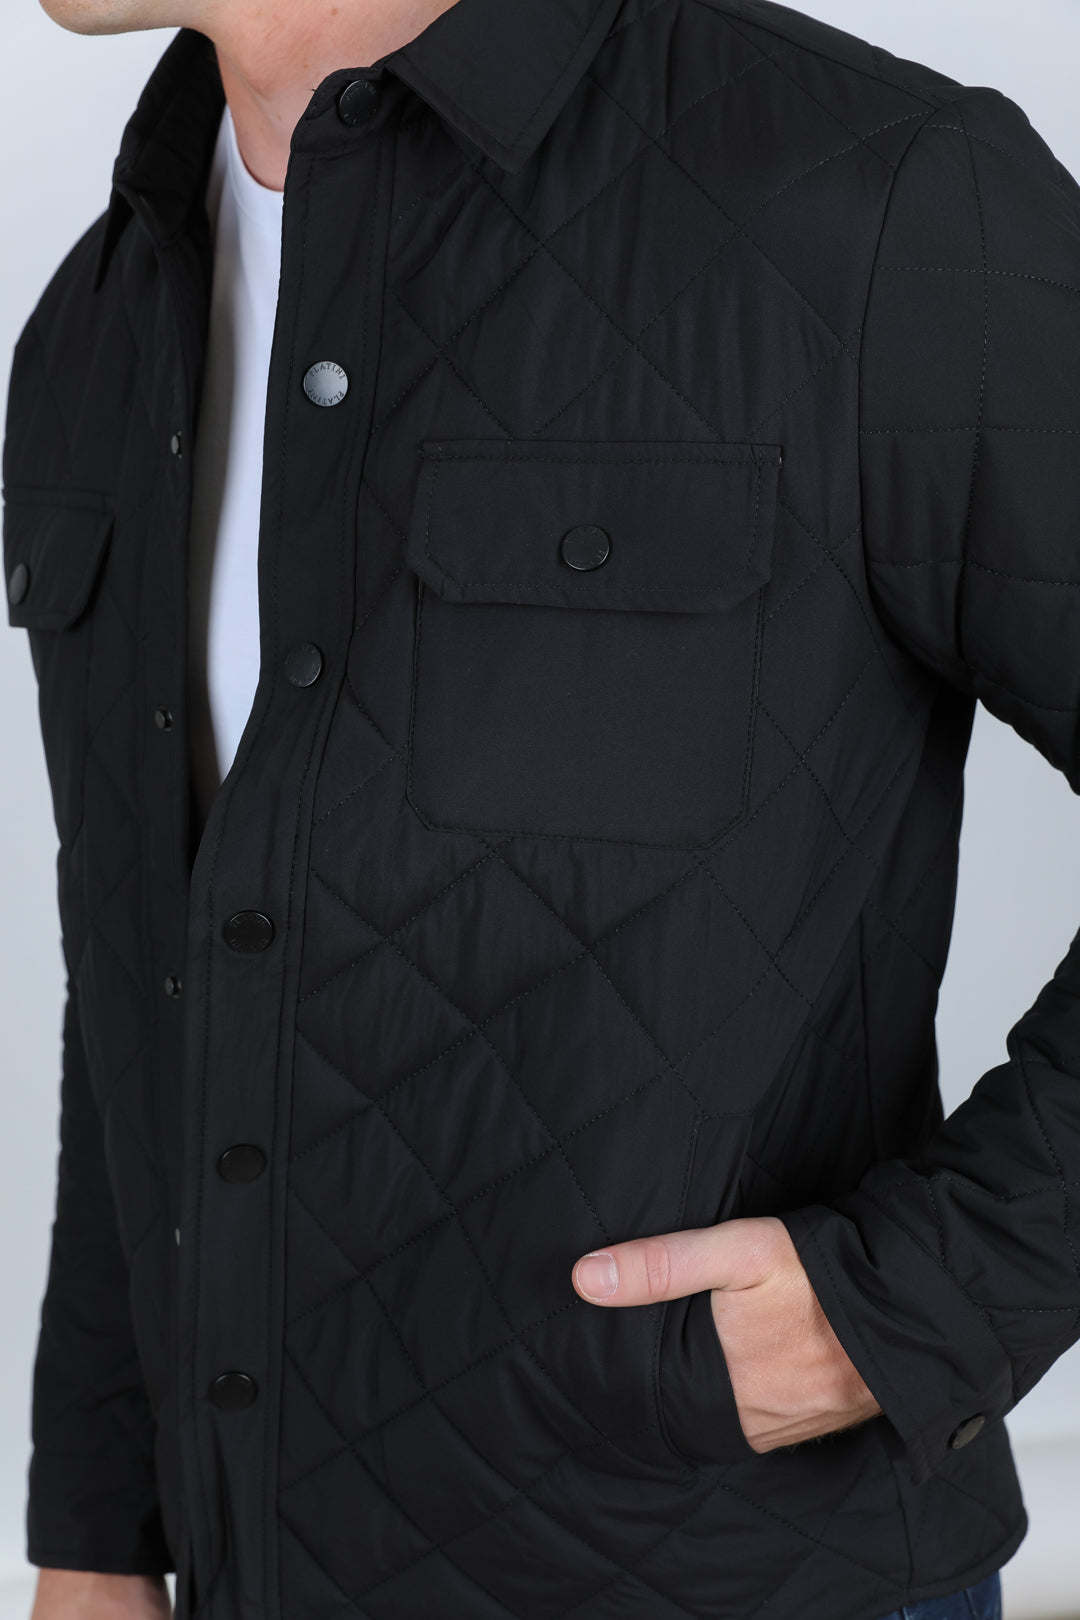 Mens Fur Lined Insulated Overshirt - Black